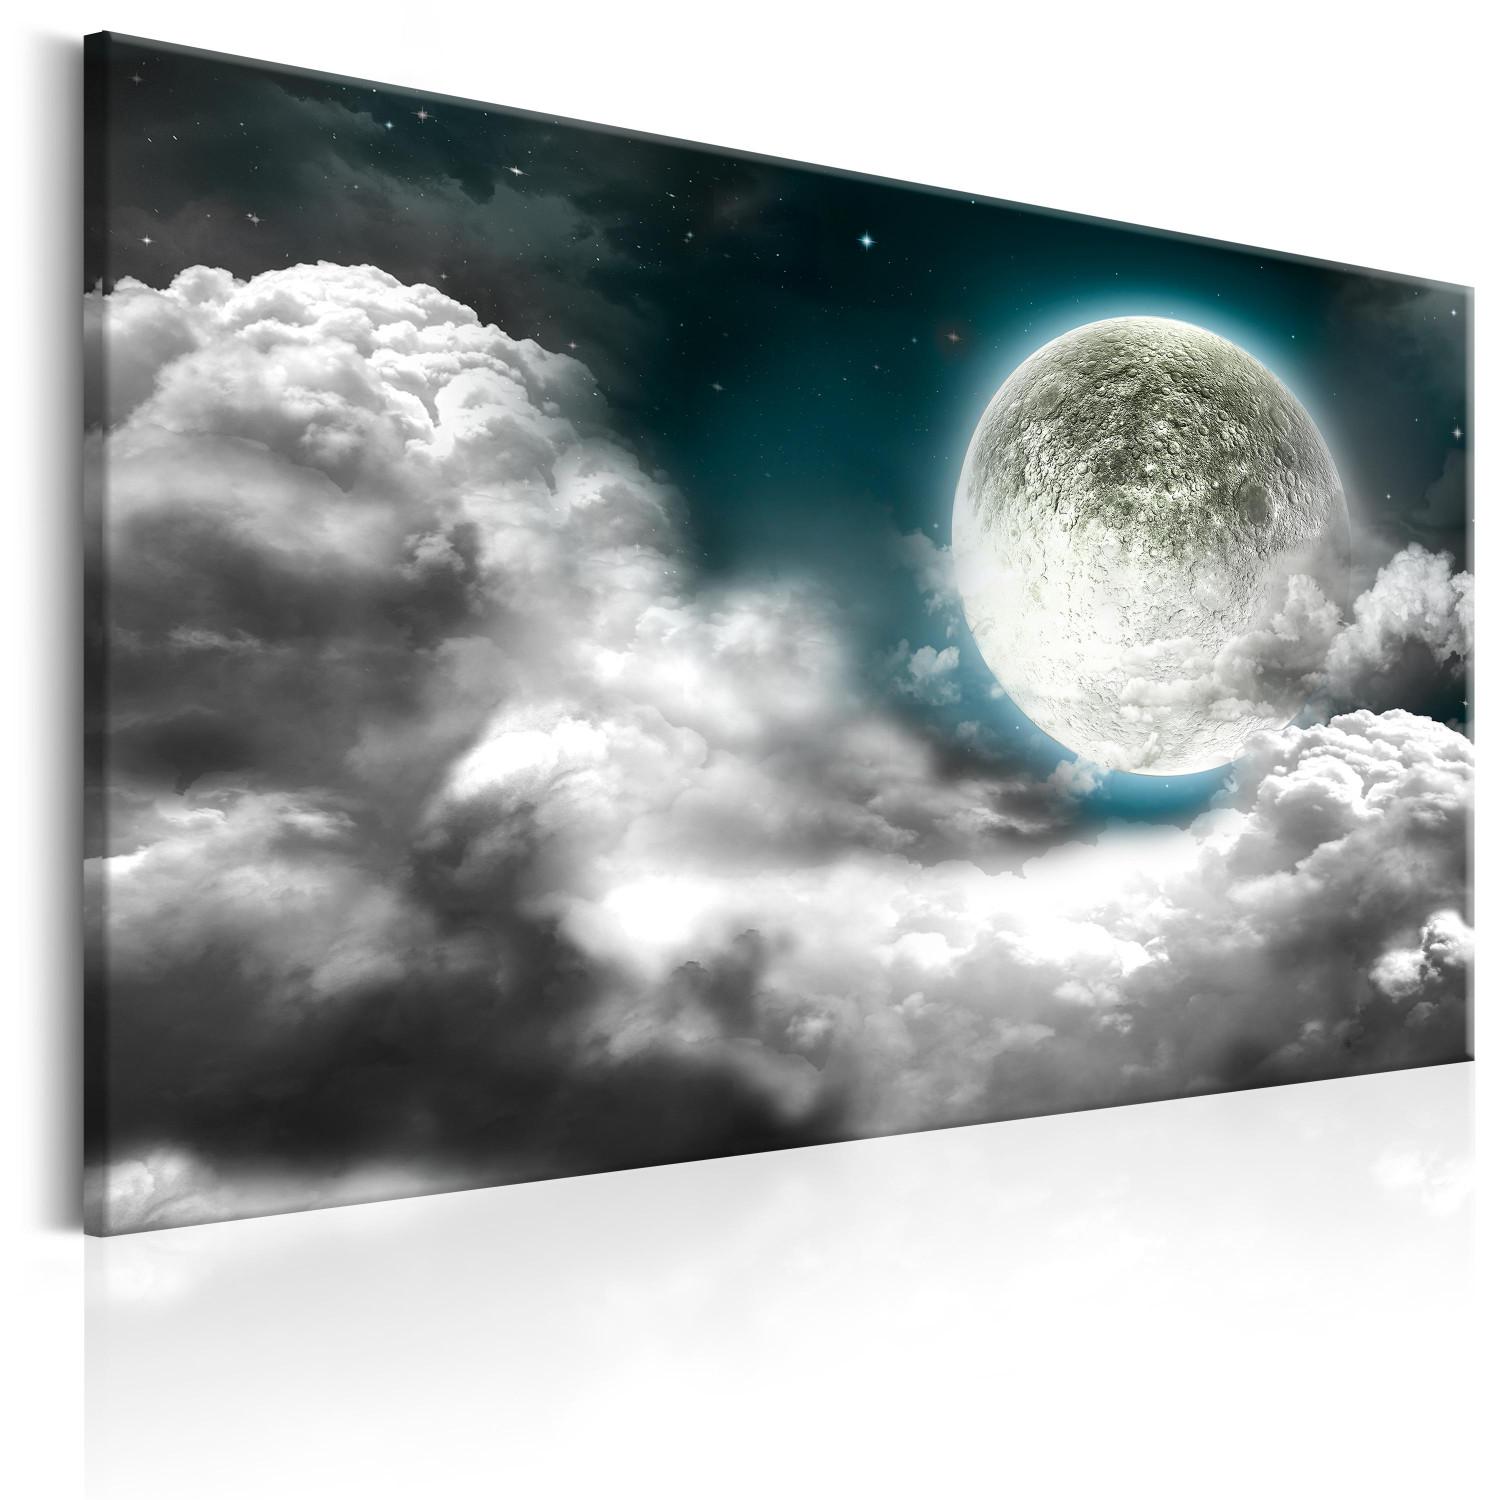 Canvas Silver Globe (1-piece) - Thick Clouds and Moonlit Sky